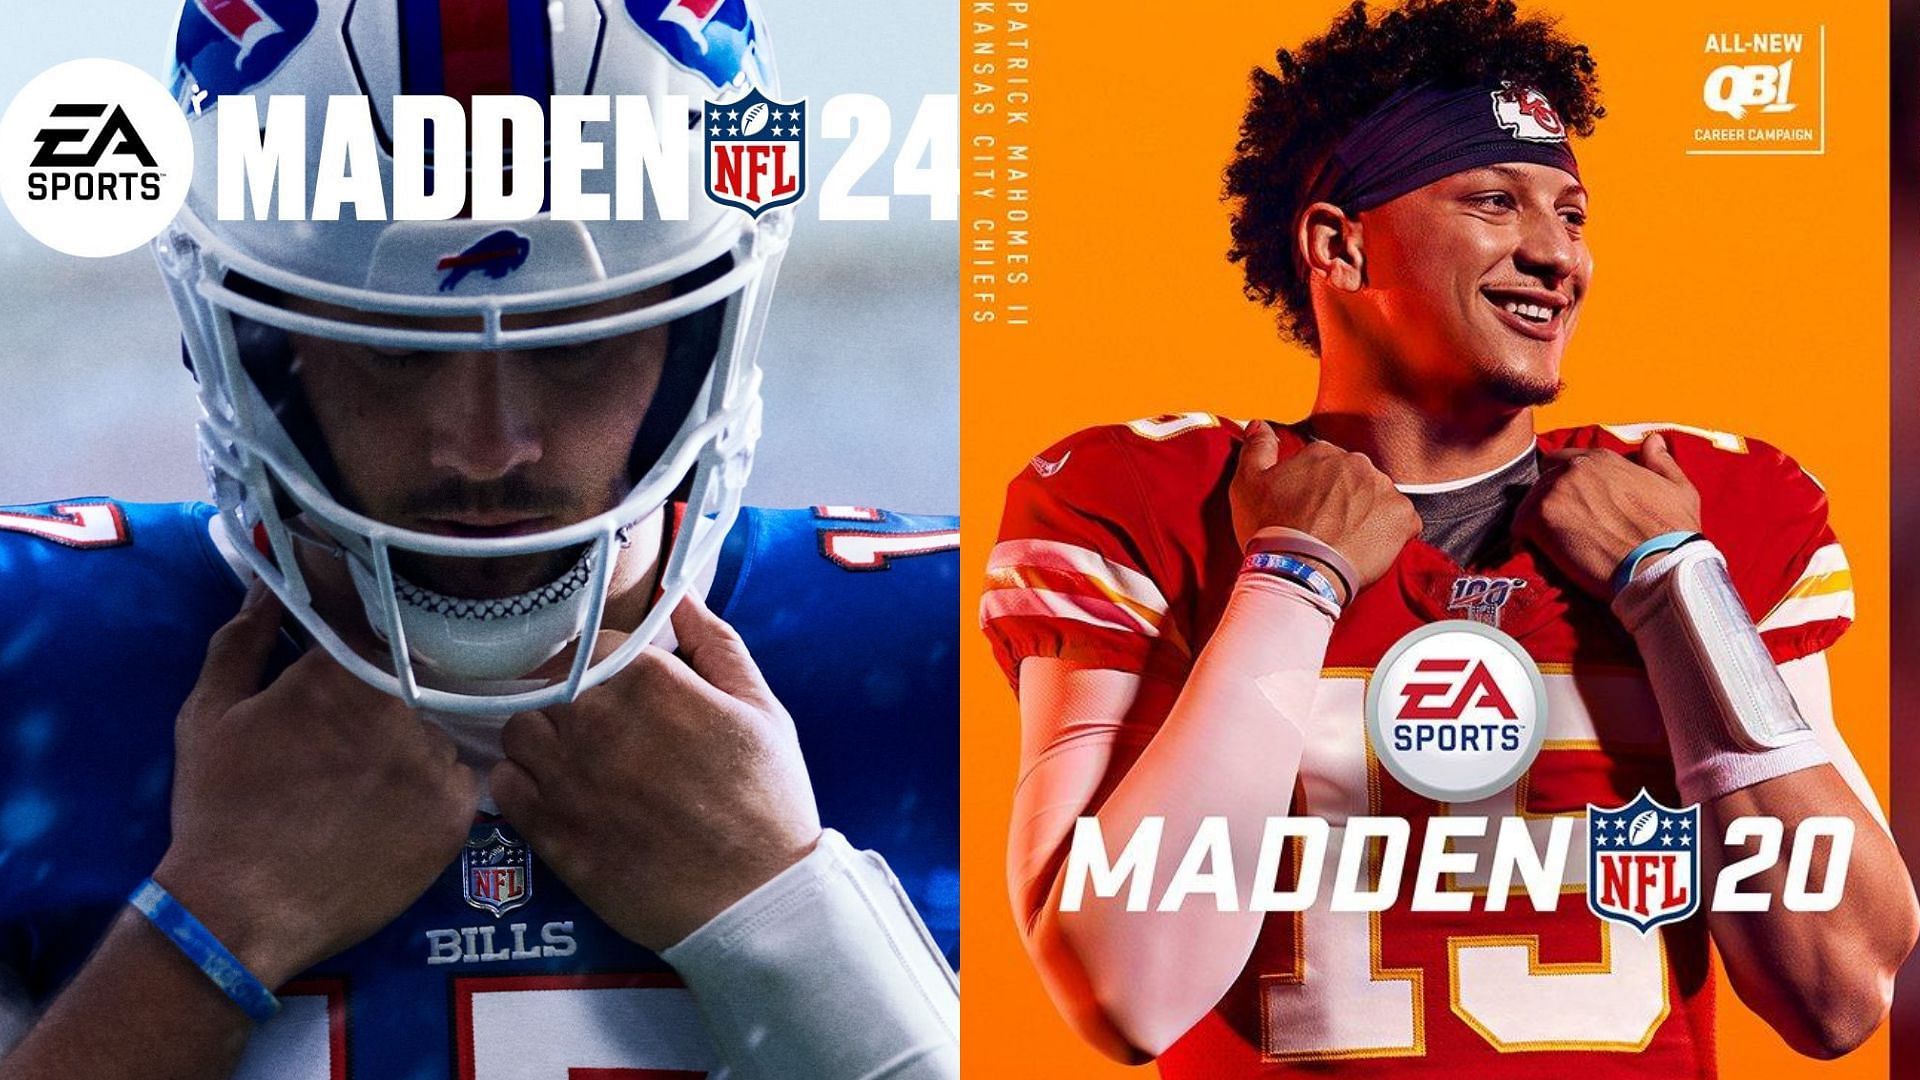 Madden 24 cover featuring Josh Allen and Madden 20 cover featuring Patrick Mahomes. (Image credit: Josh Allen on Twitter, GameStop.com)